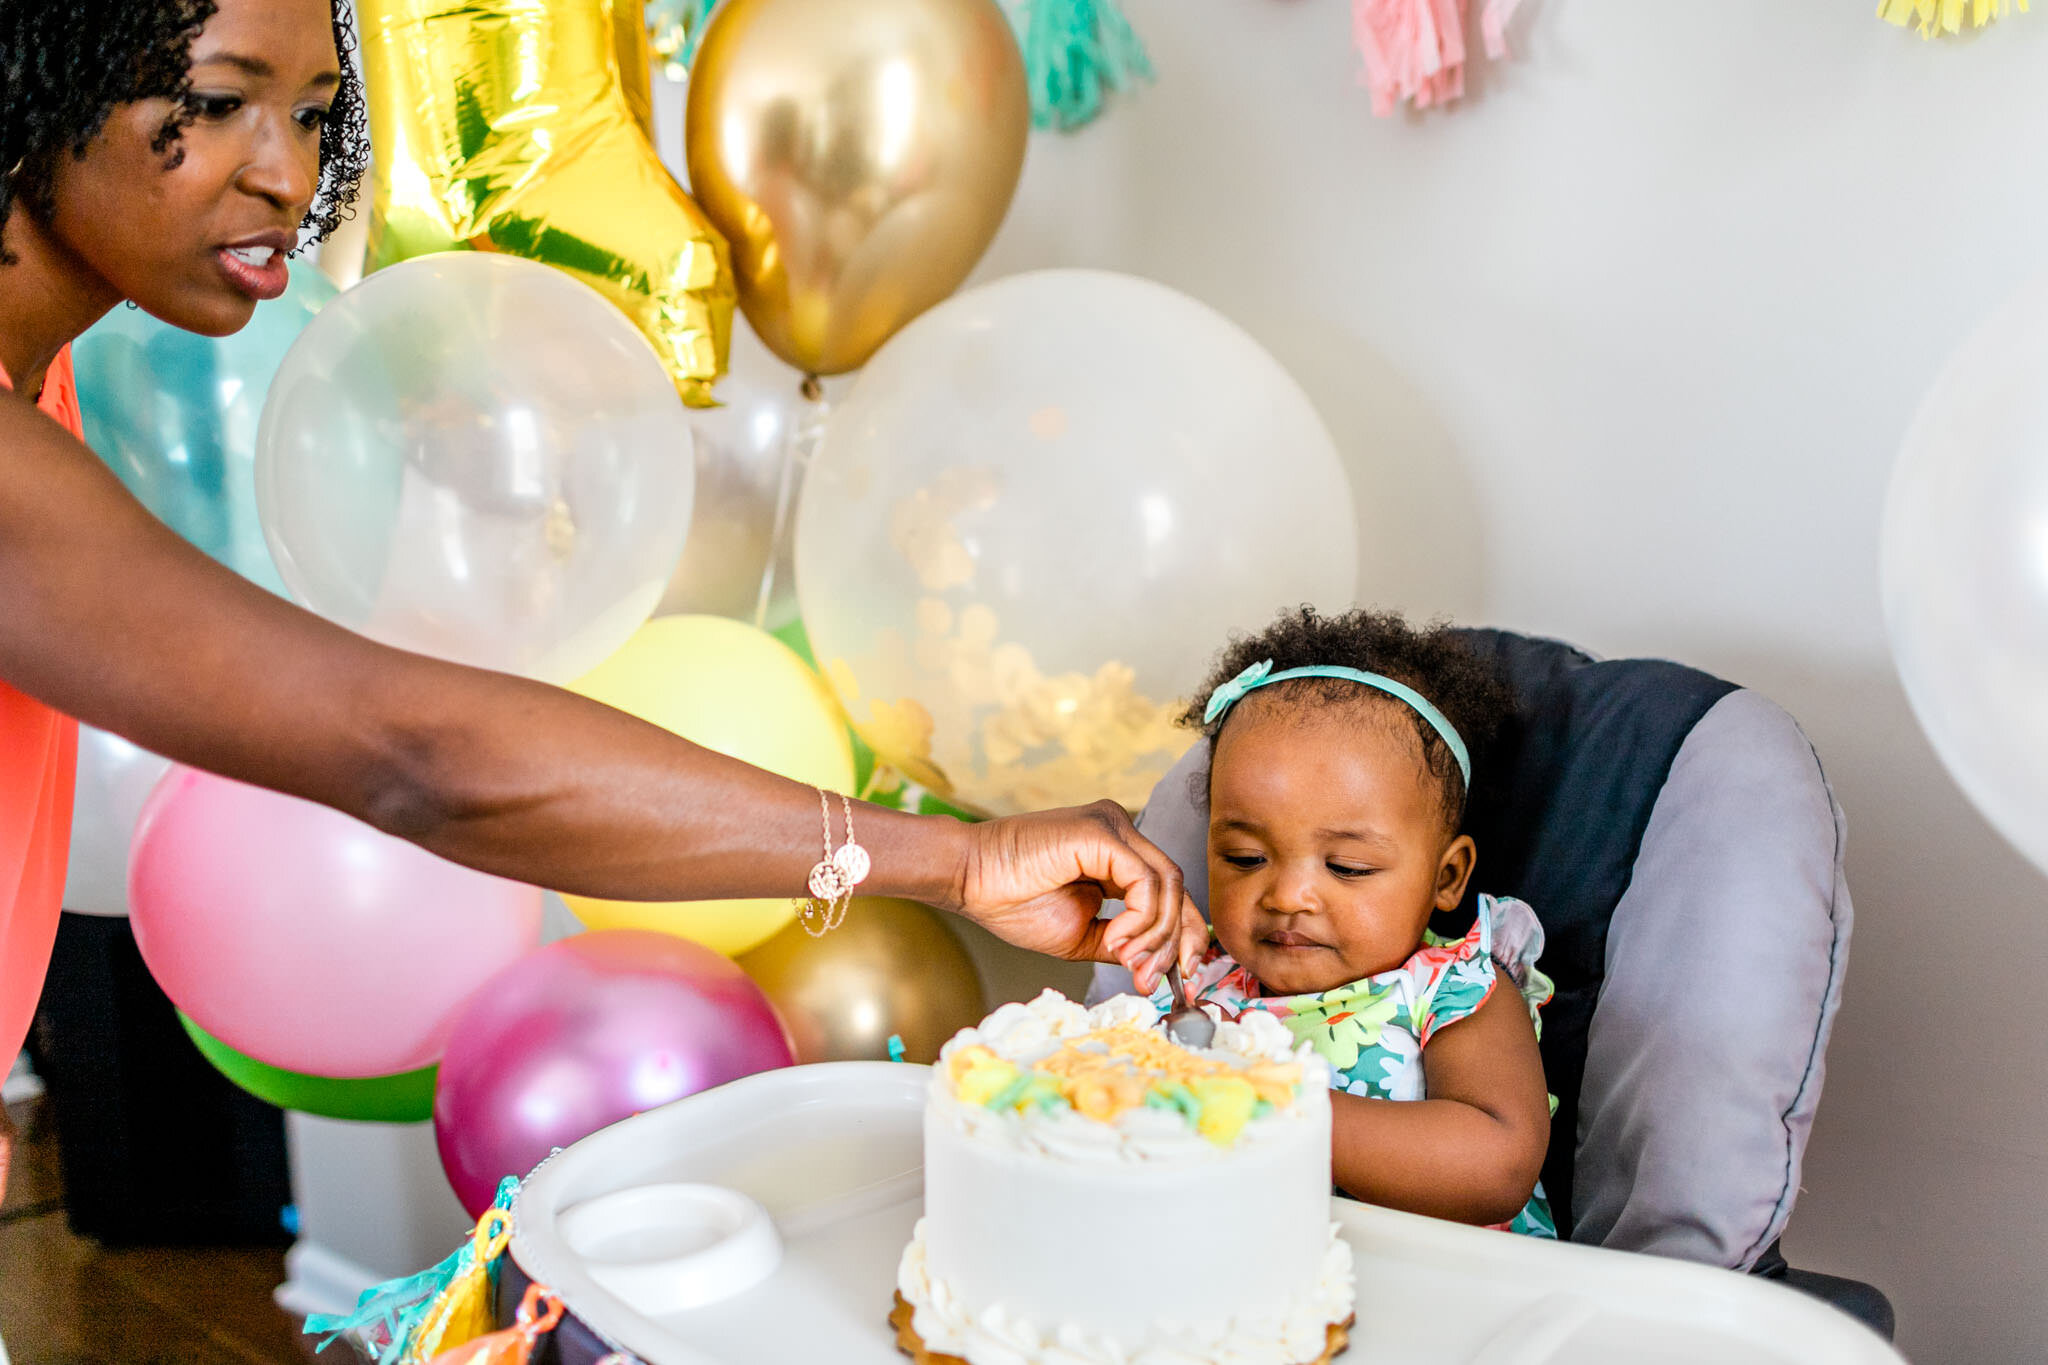 Durham Family Photographer | By G. Lin Photography | Mother scooping cake 